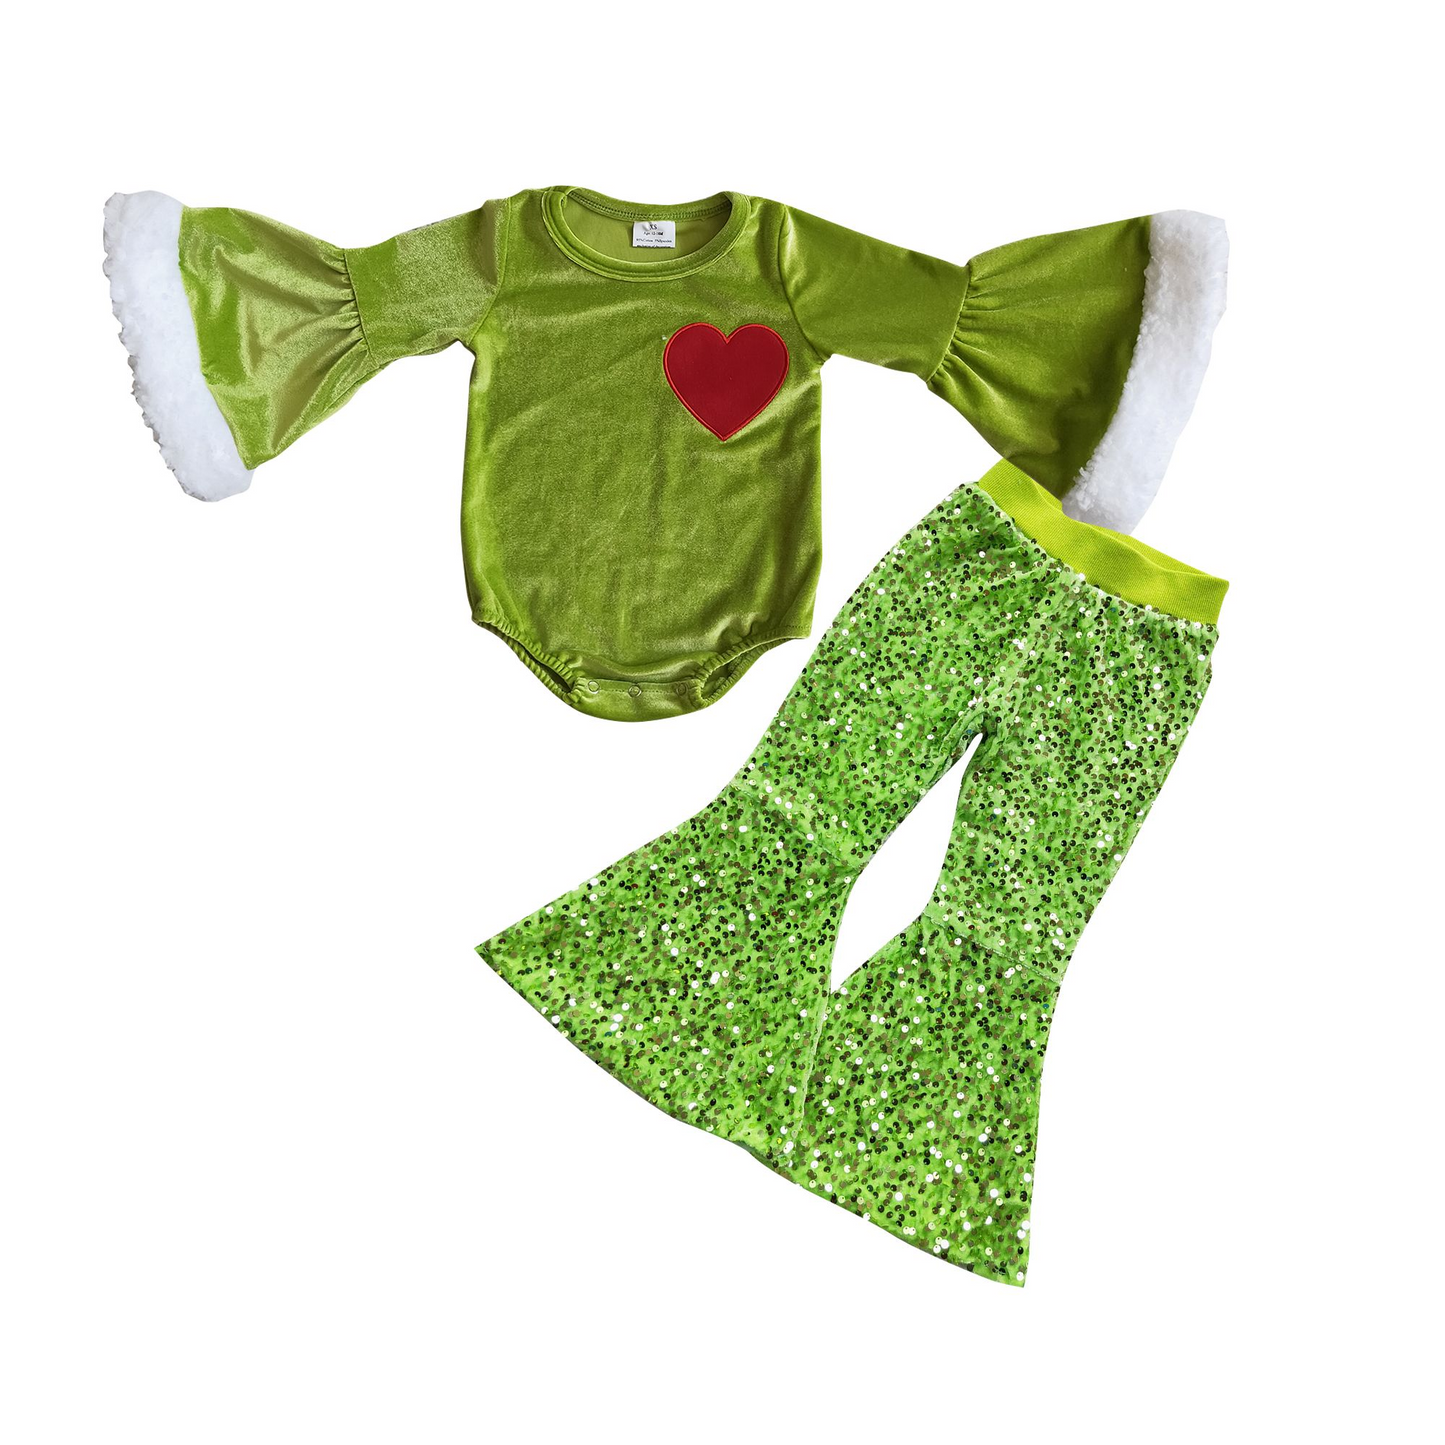 Heart embroidery green face romper 6 A4-4 green sequin pants P0148 girls Christmas outfits